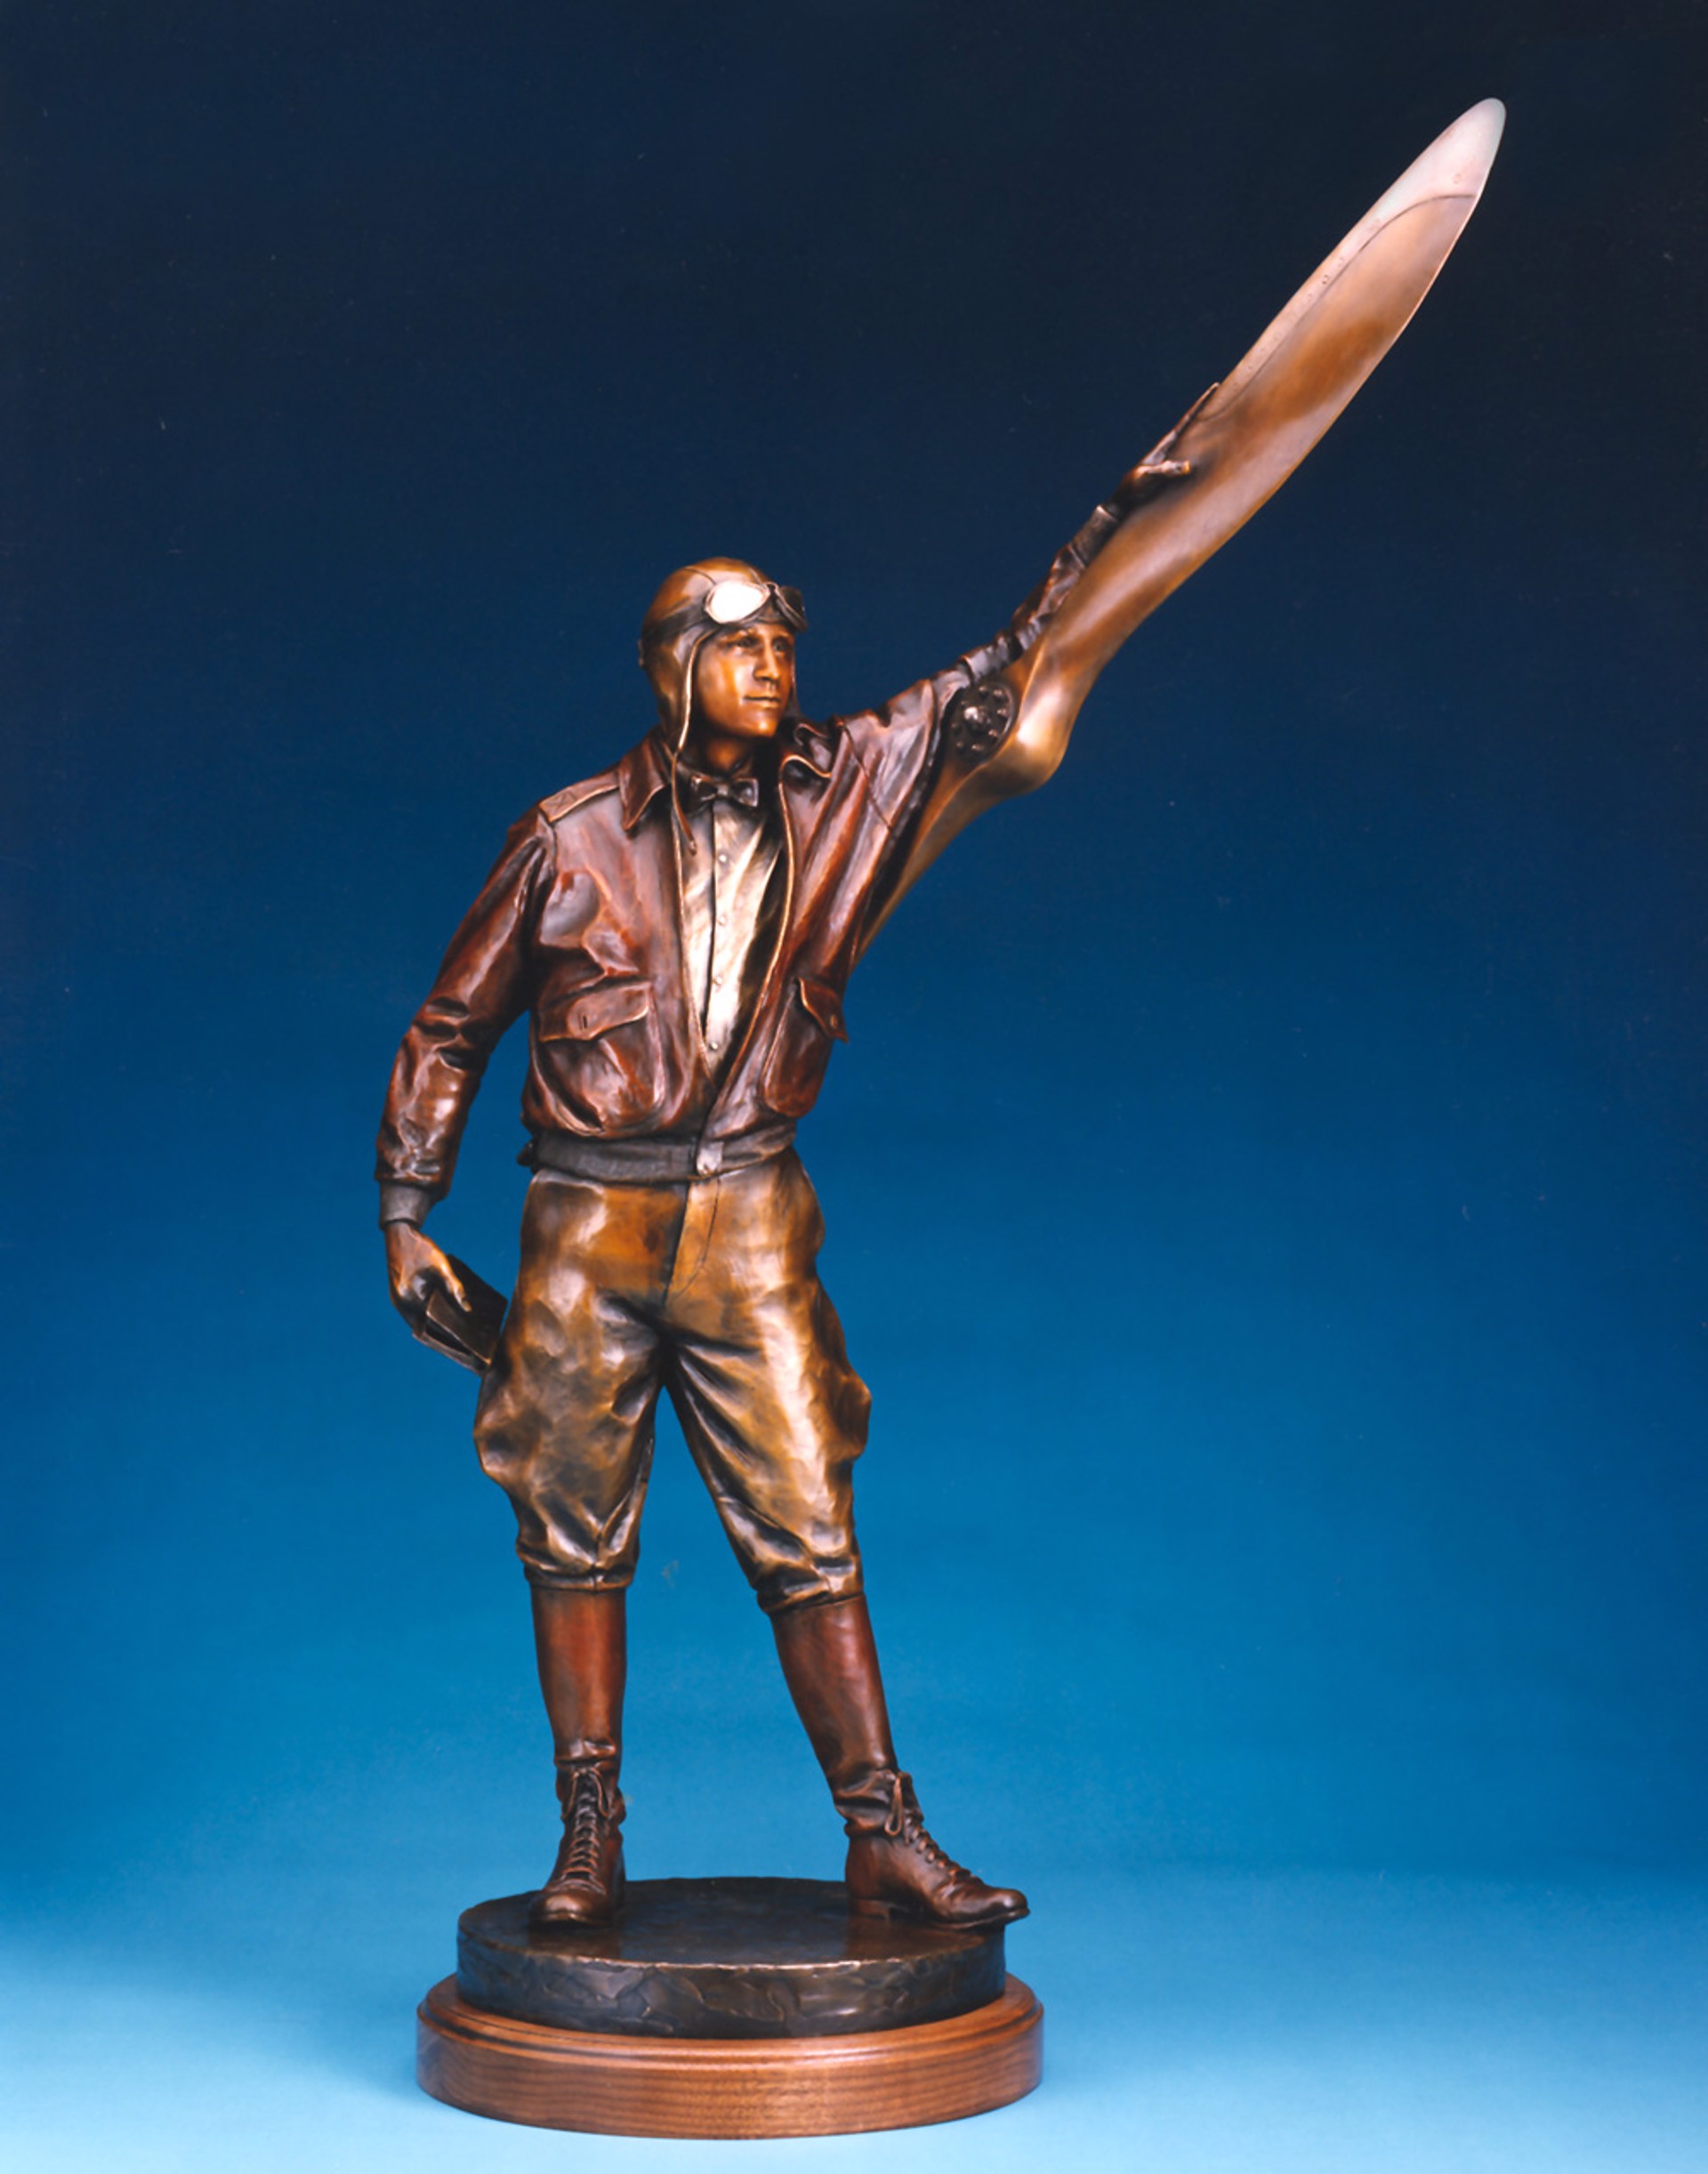 Aviator by George Lundeen